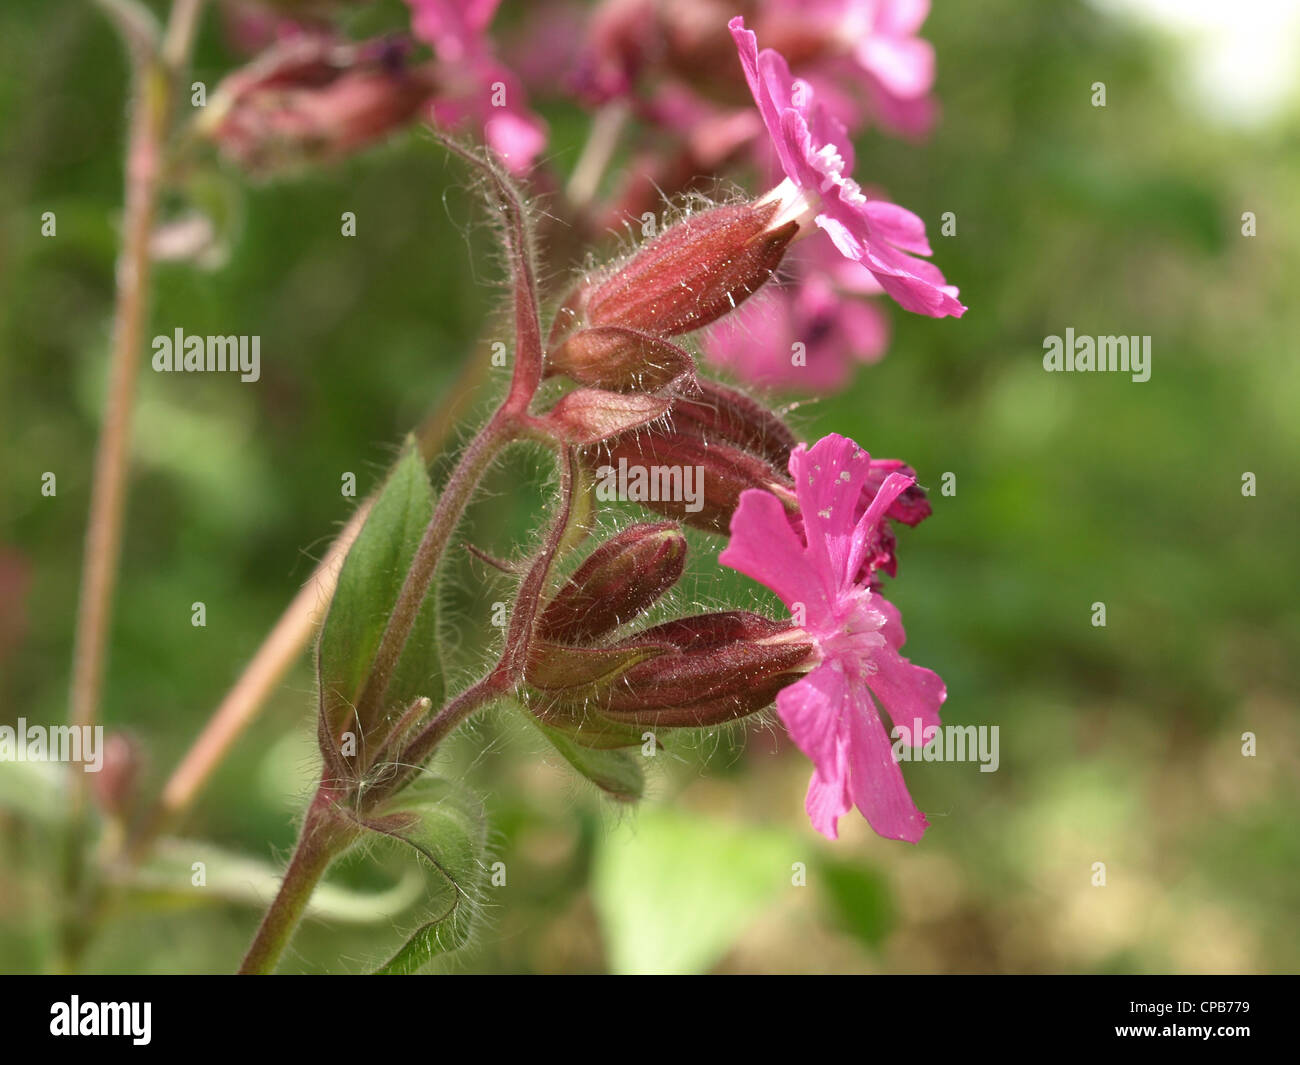 Red campion / Silene dioica / Rote Lichtnelke Stock Photo